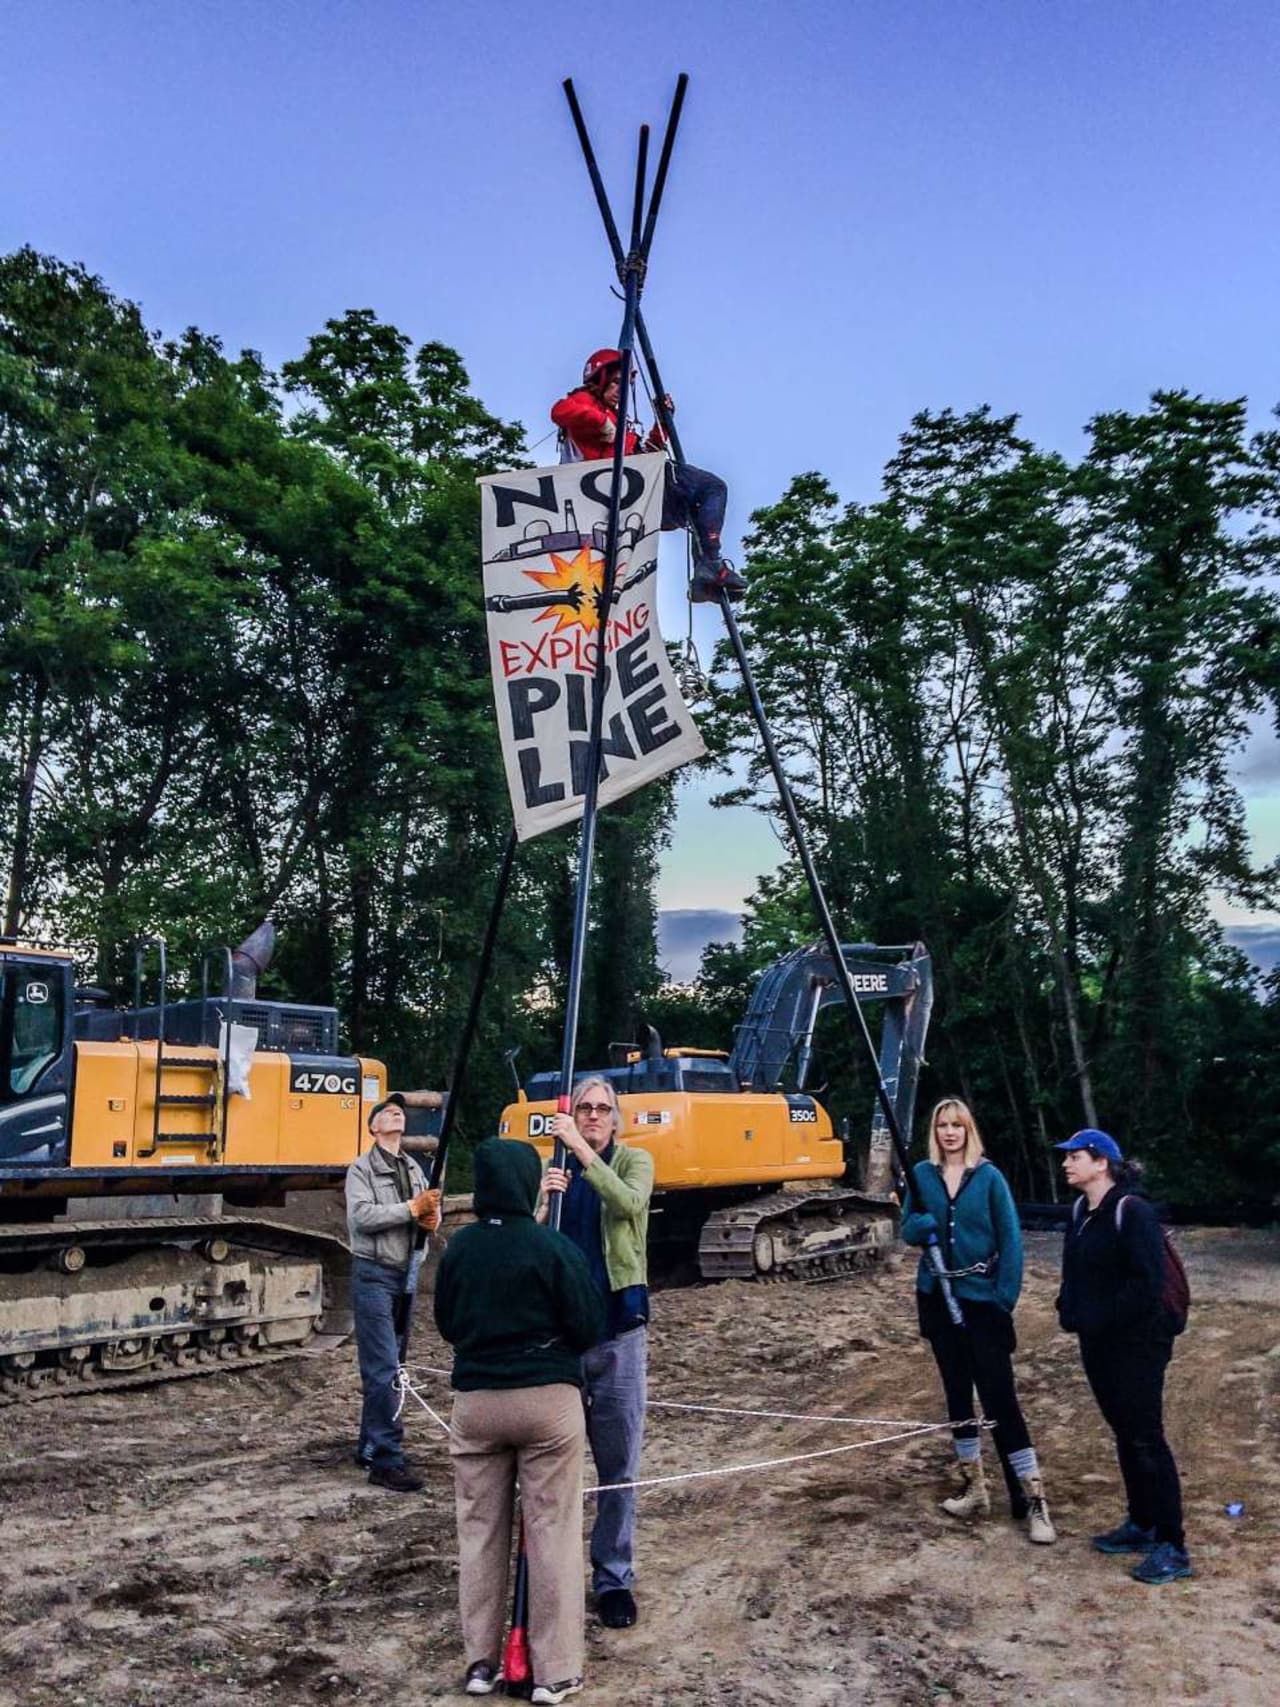 A protester climbed up a 20-foot tripod to oppose construction of the Spectra pipeline.